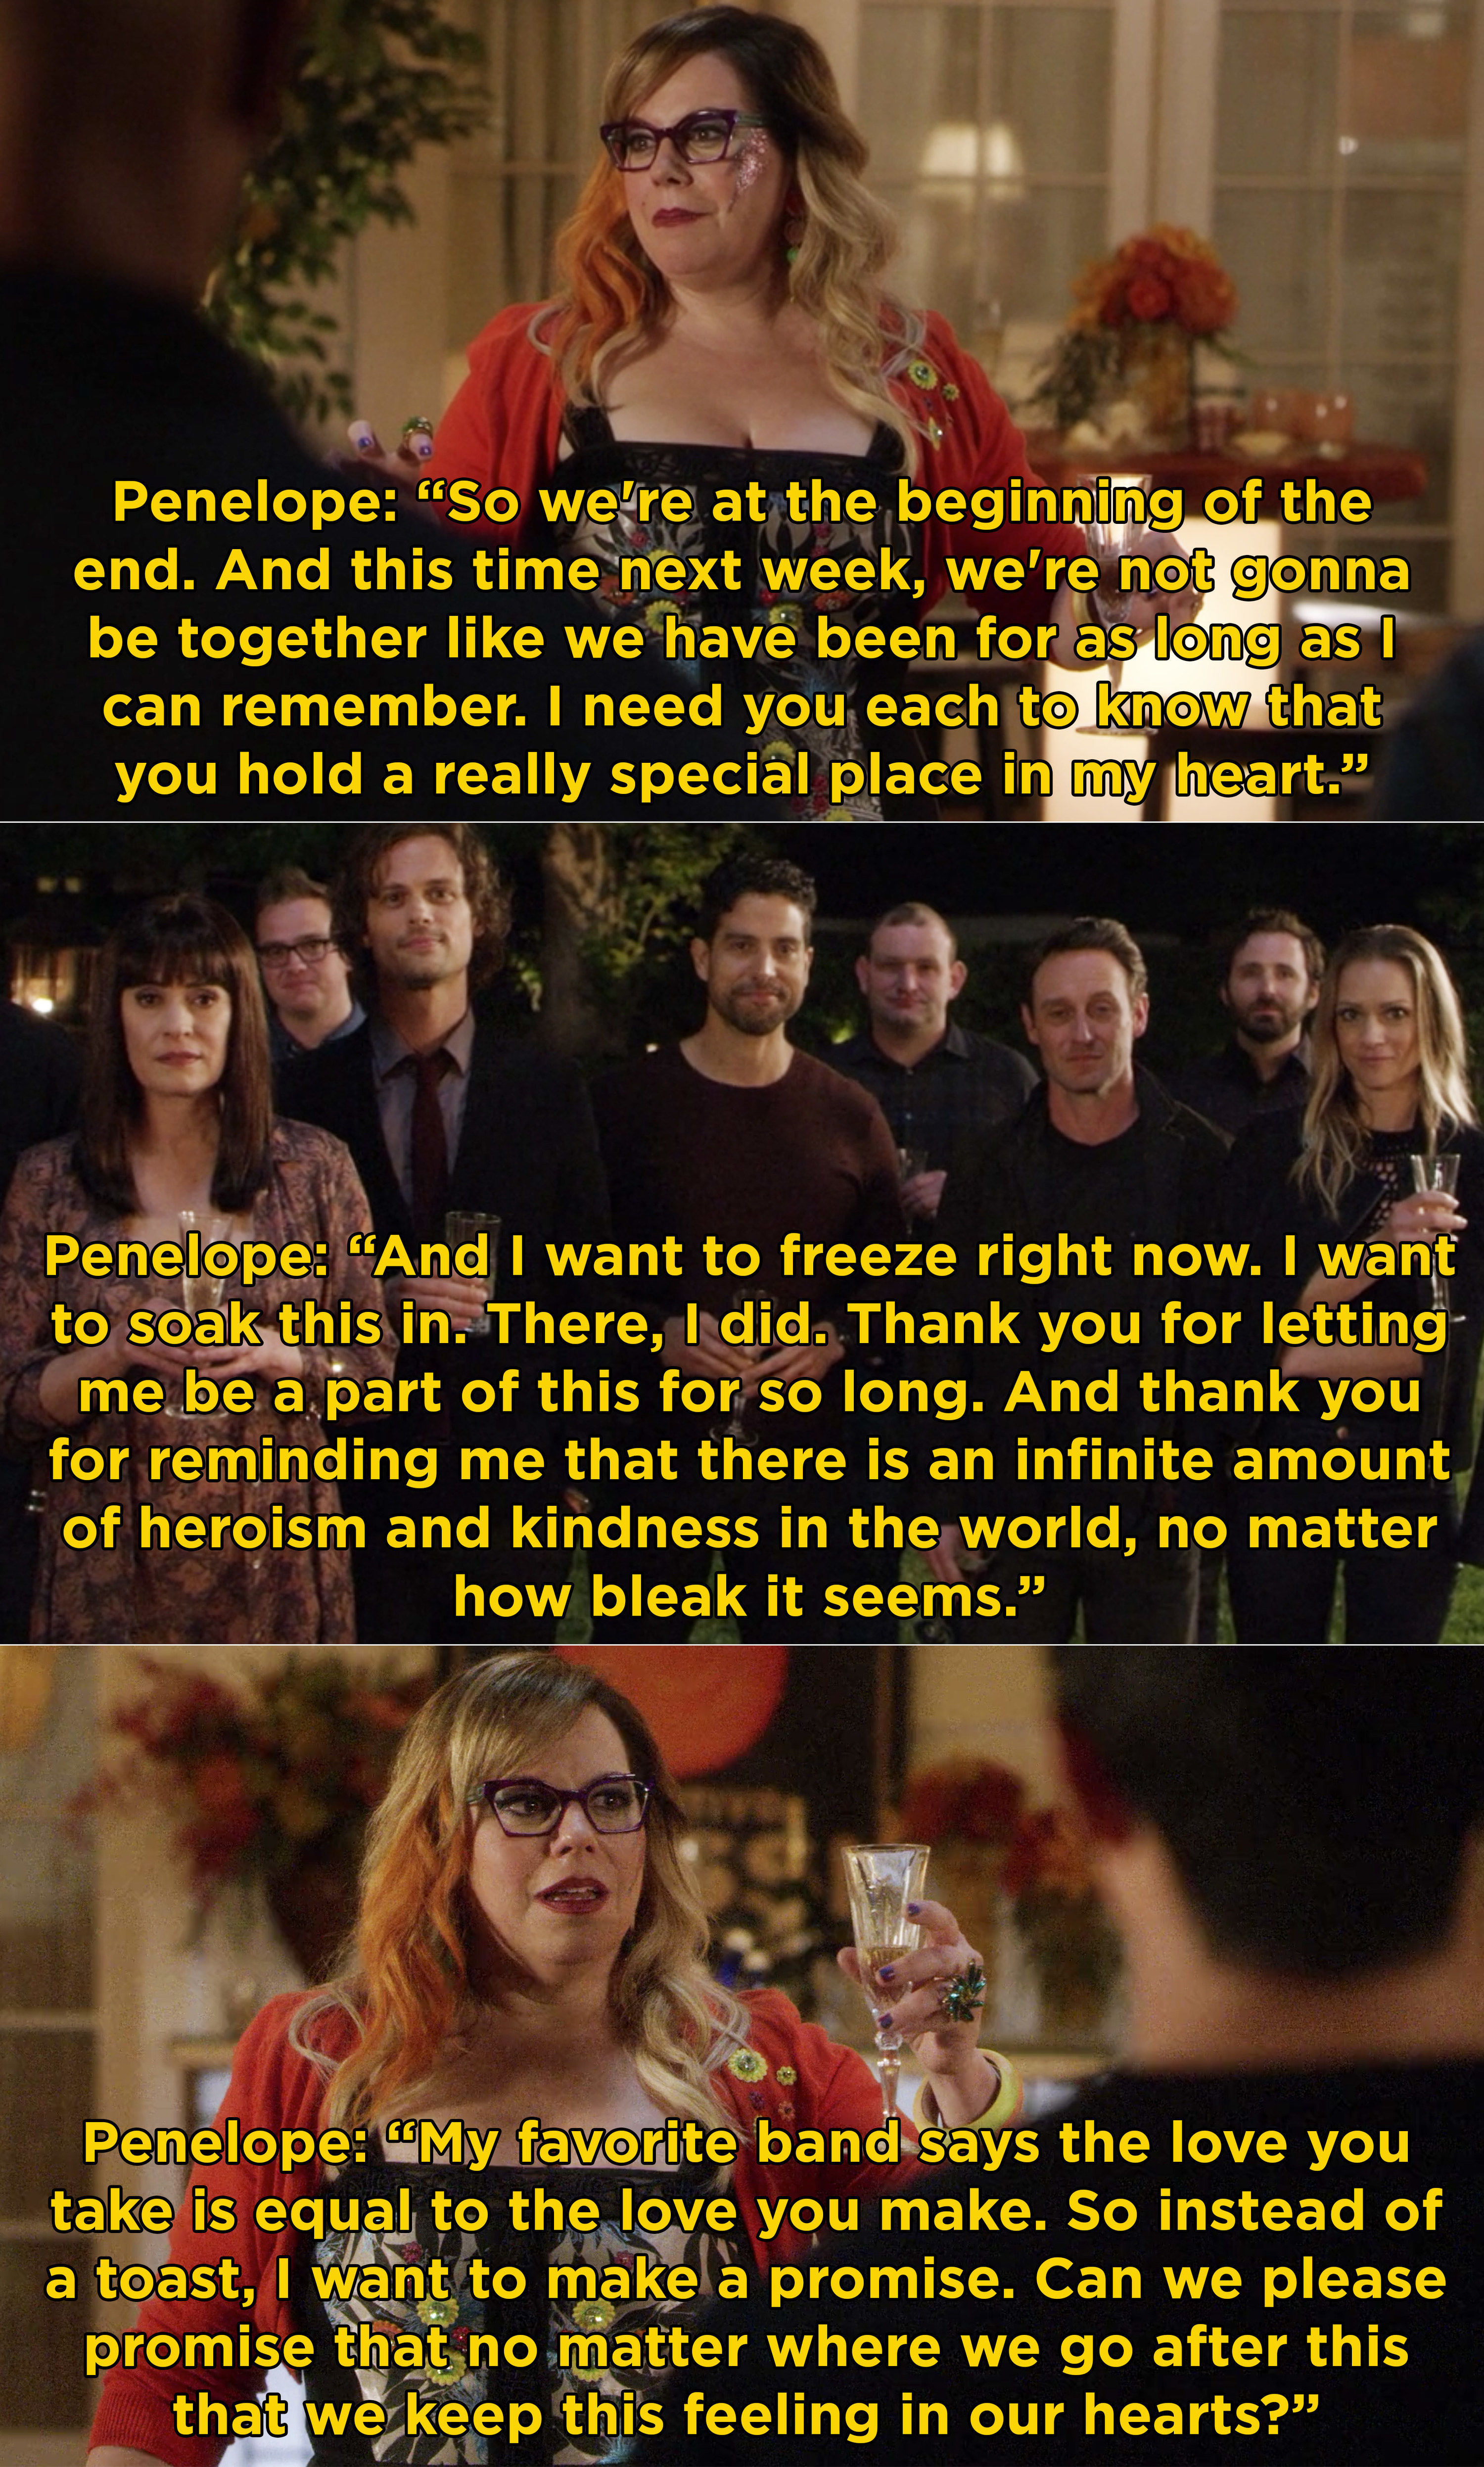 Garcia telling everyone that they hold a really special place in her heart